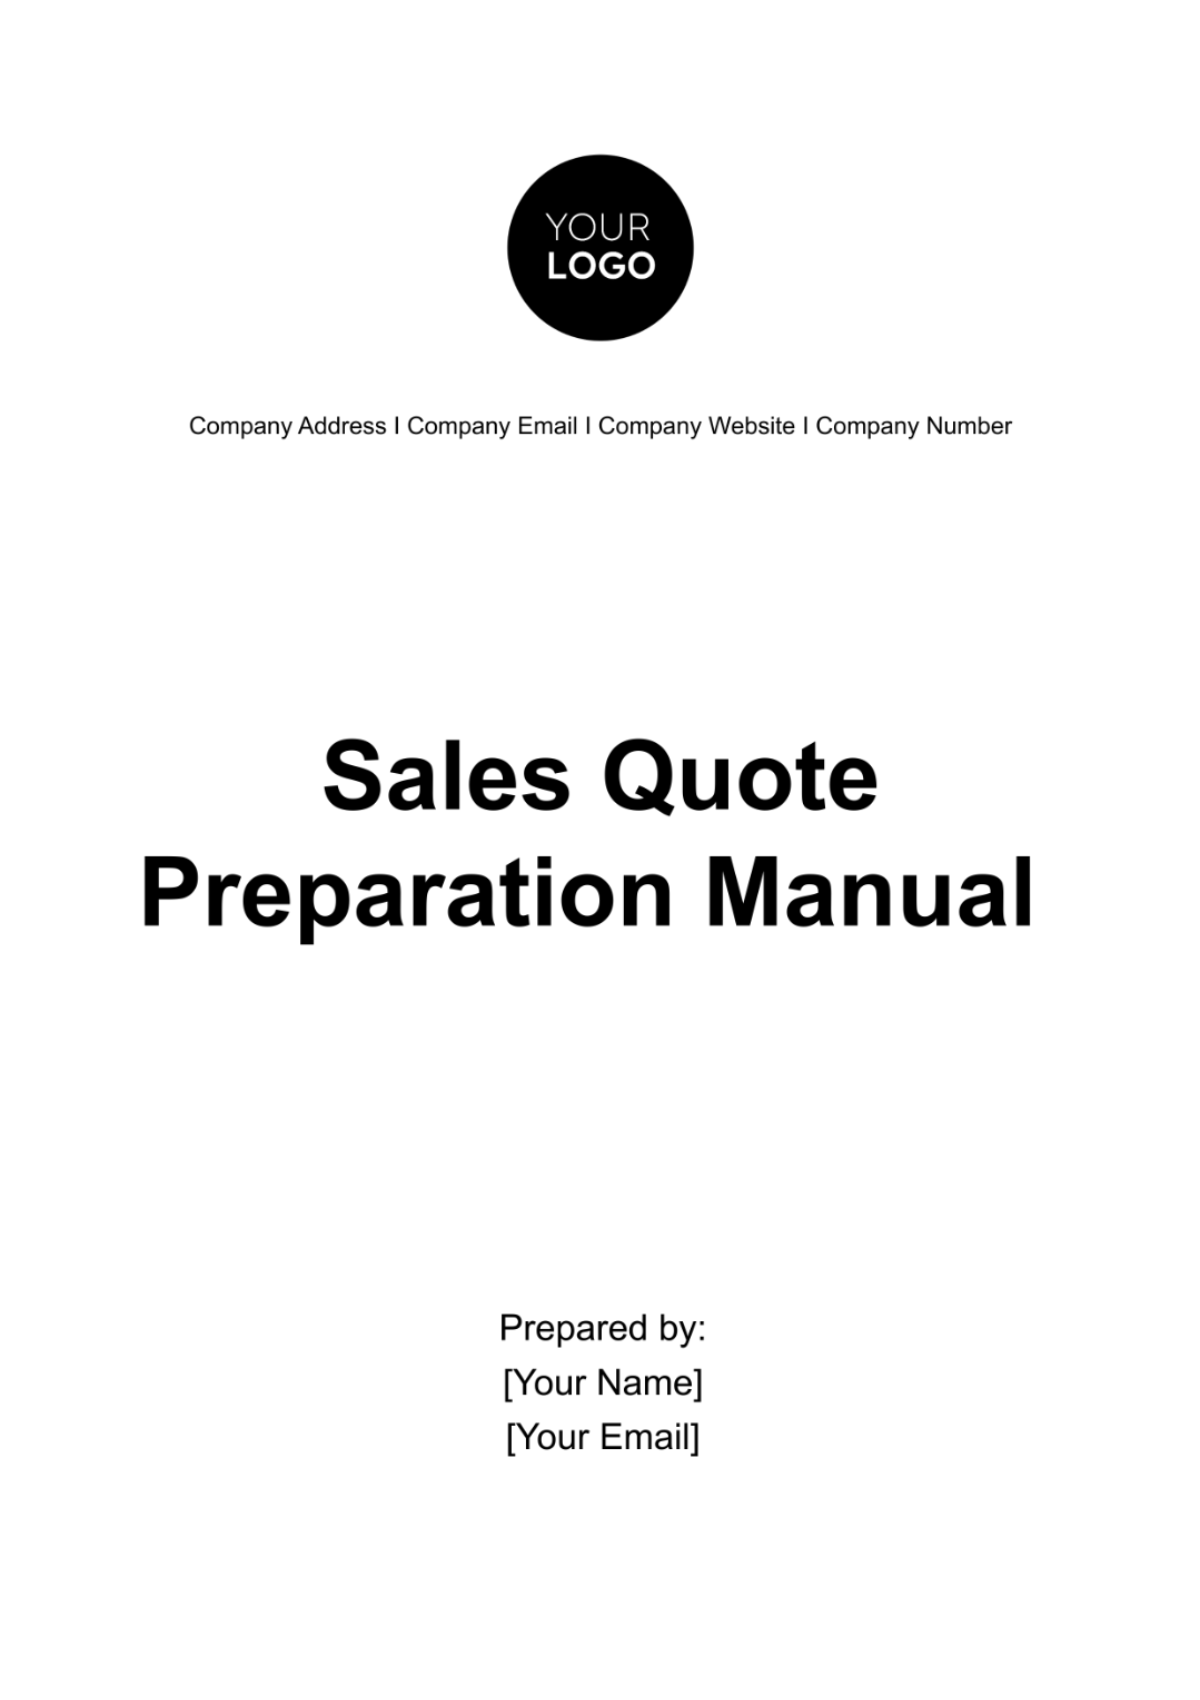 Free Sales Quote Preparation Manual Template